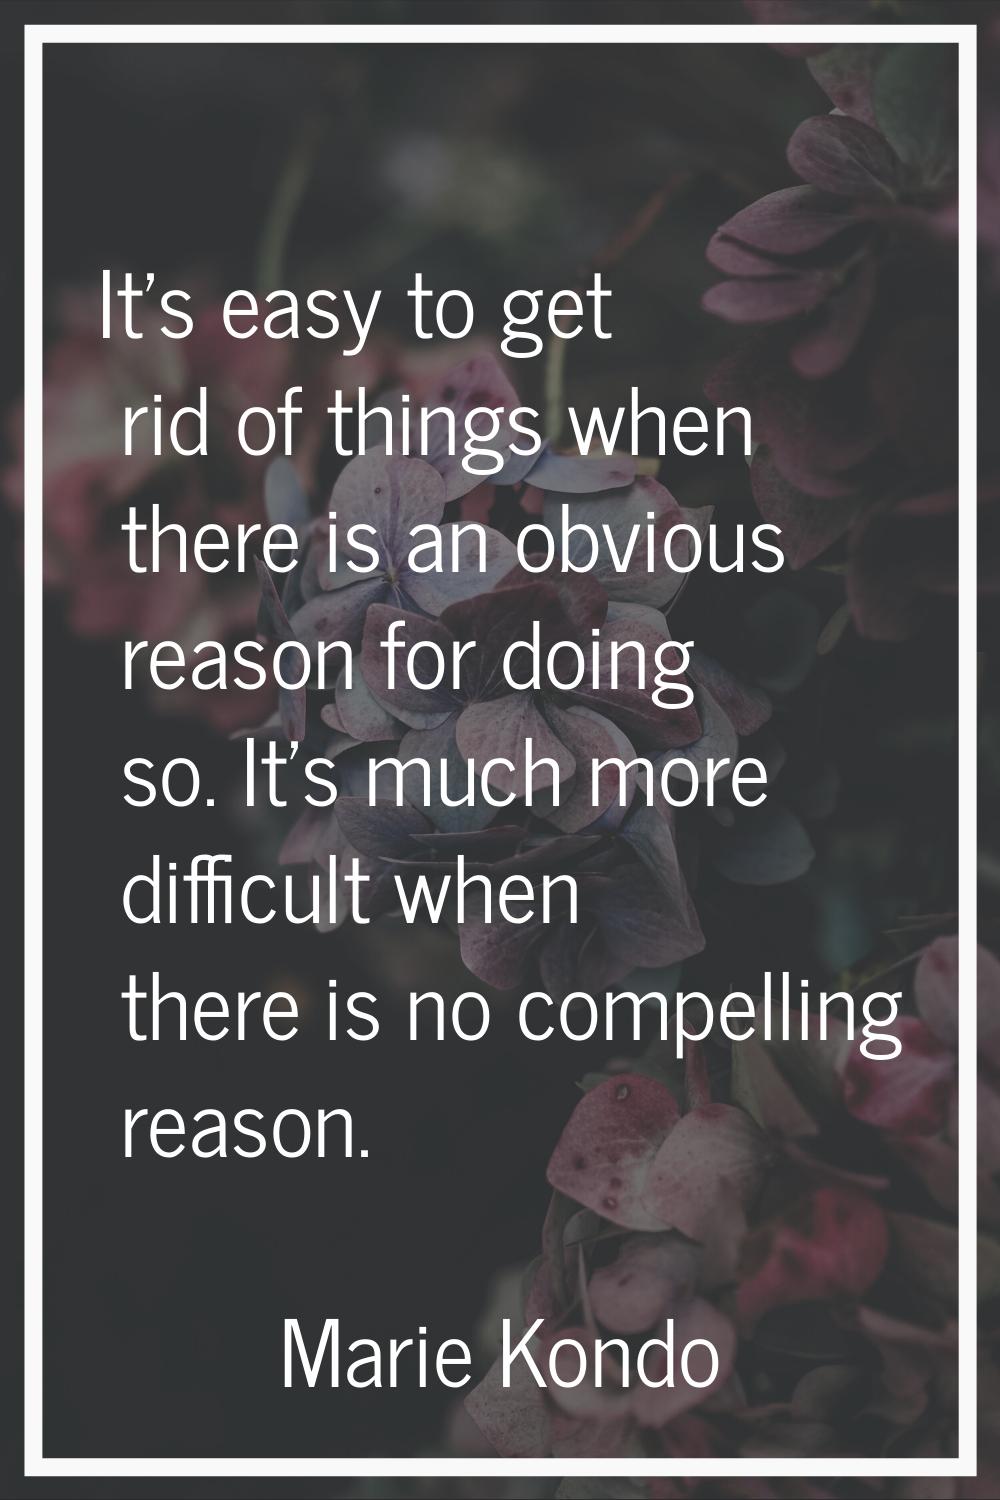 It's easy to get rid of things when there is an obvious reason for doing so. It's much more difficu